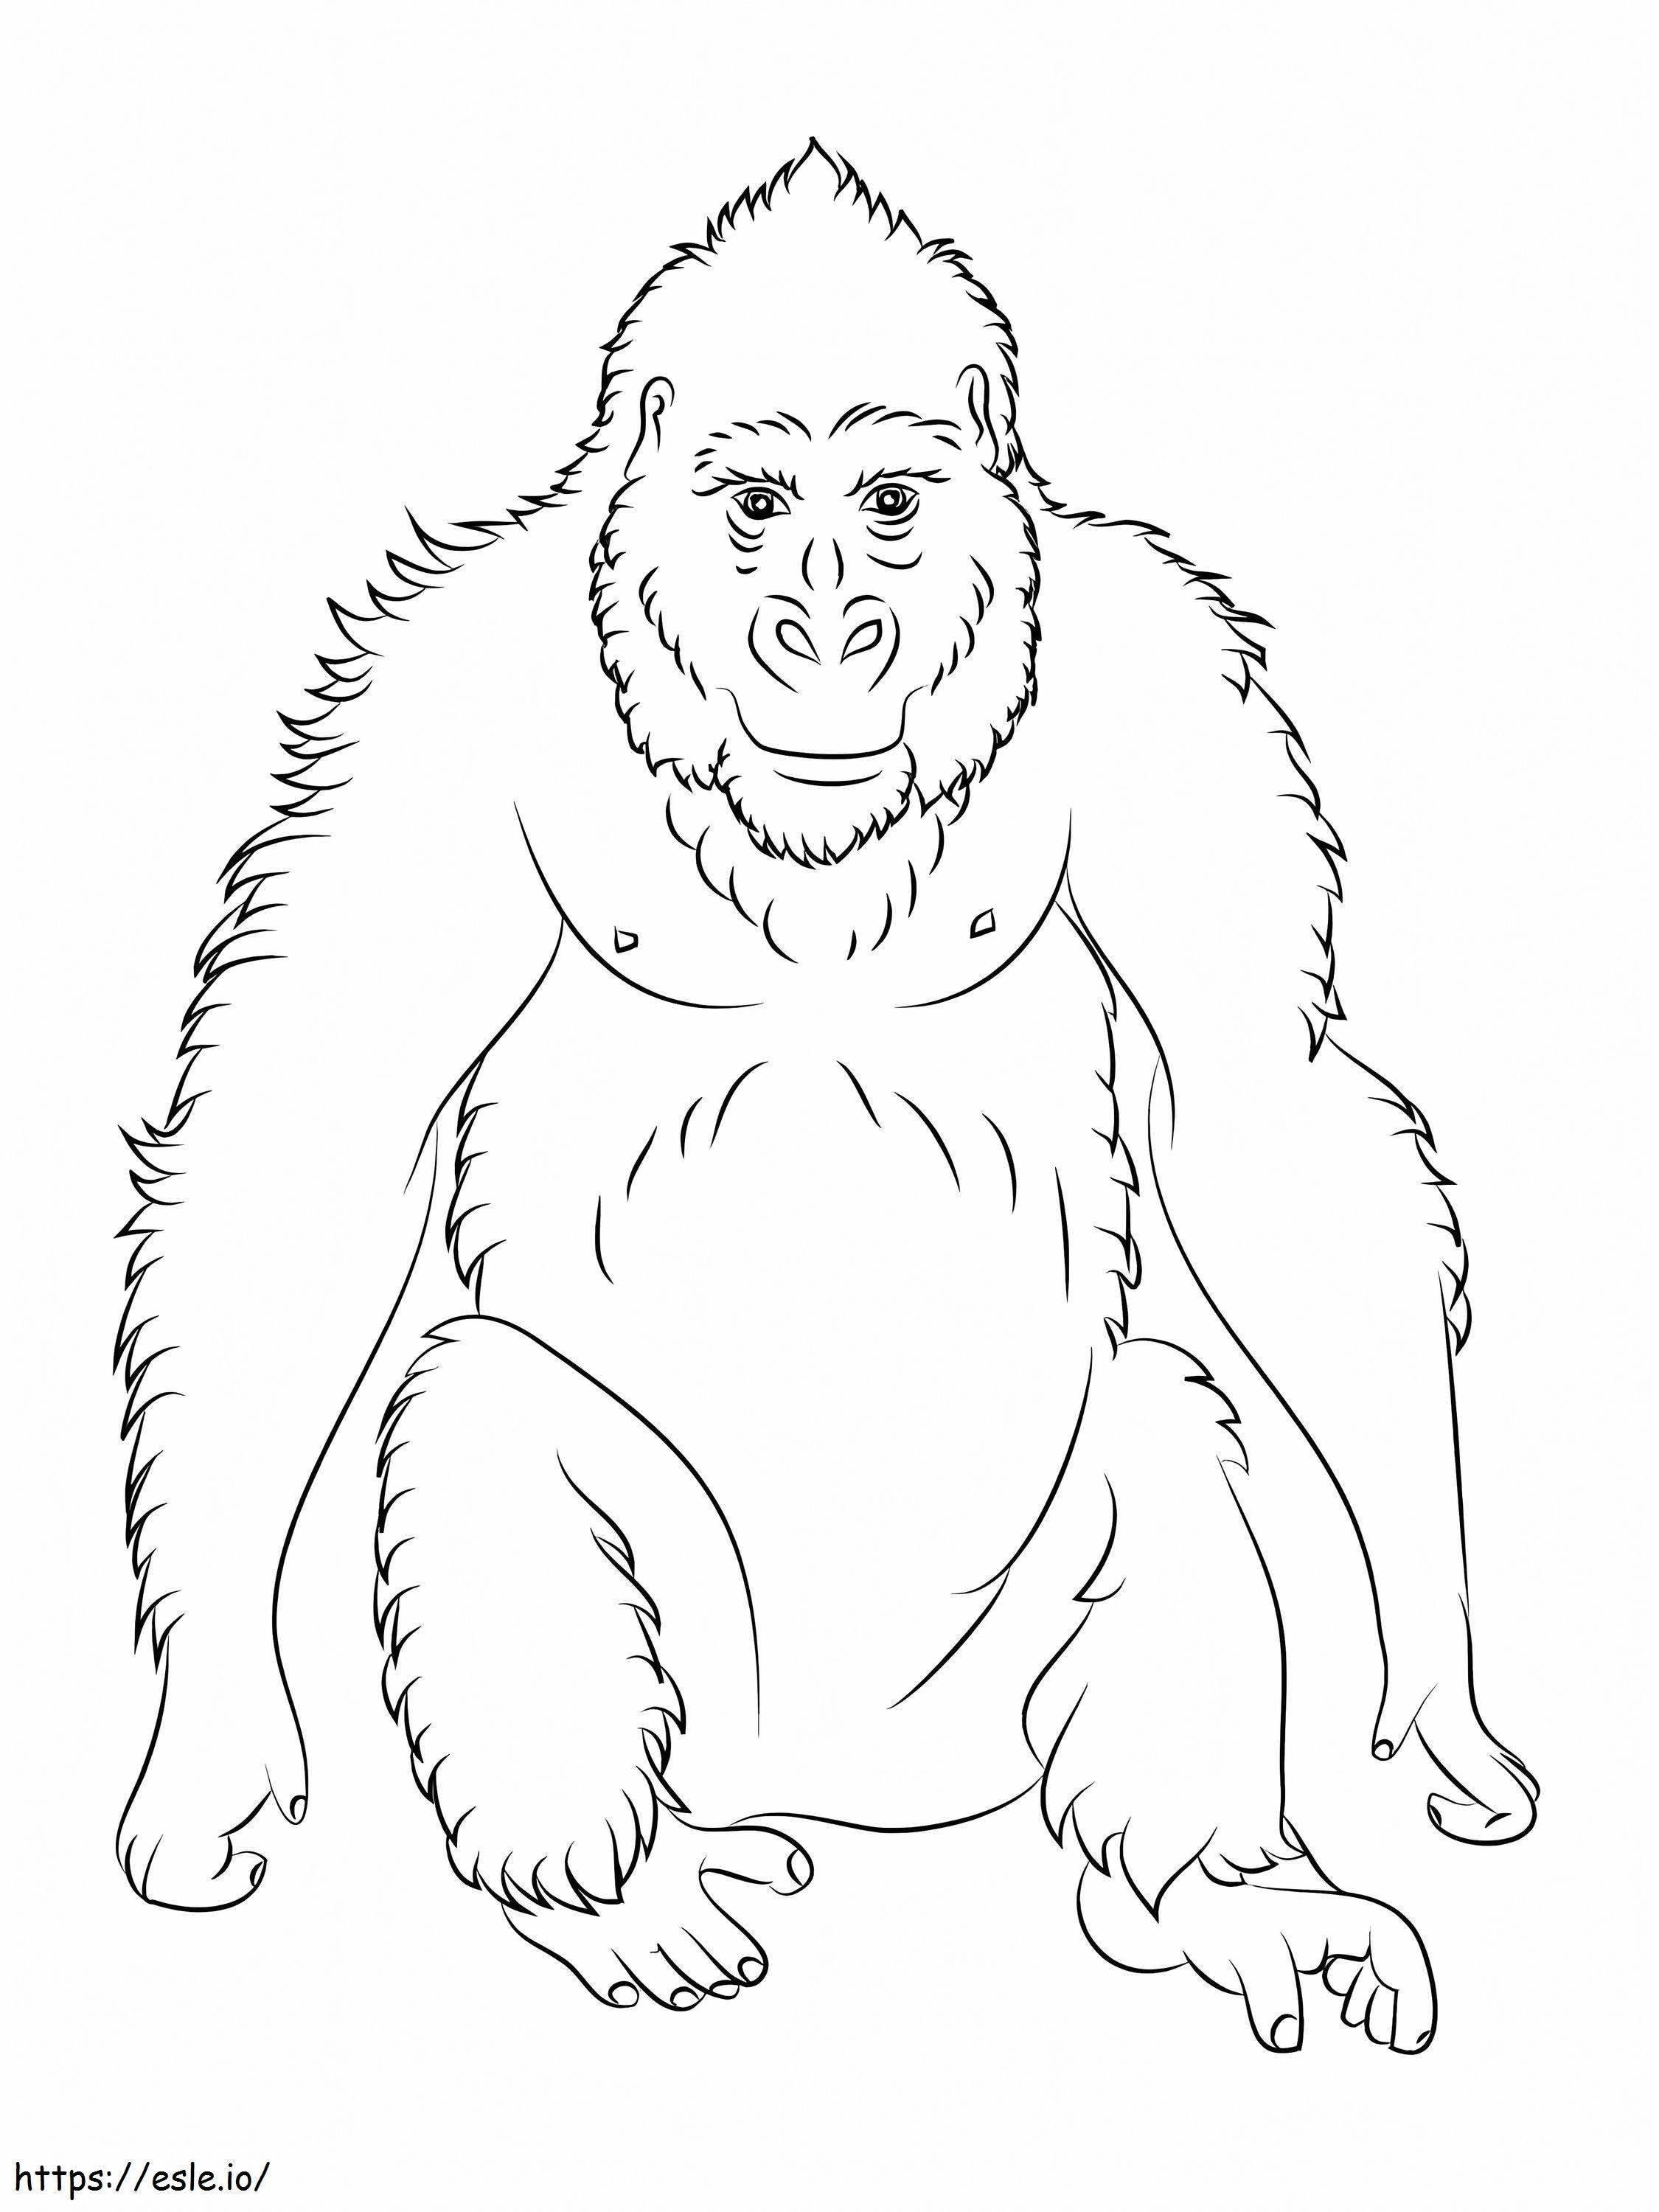 Normal Apes coloring page